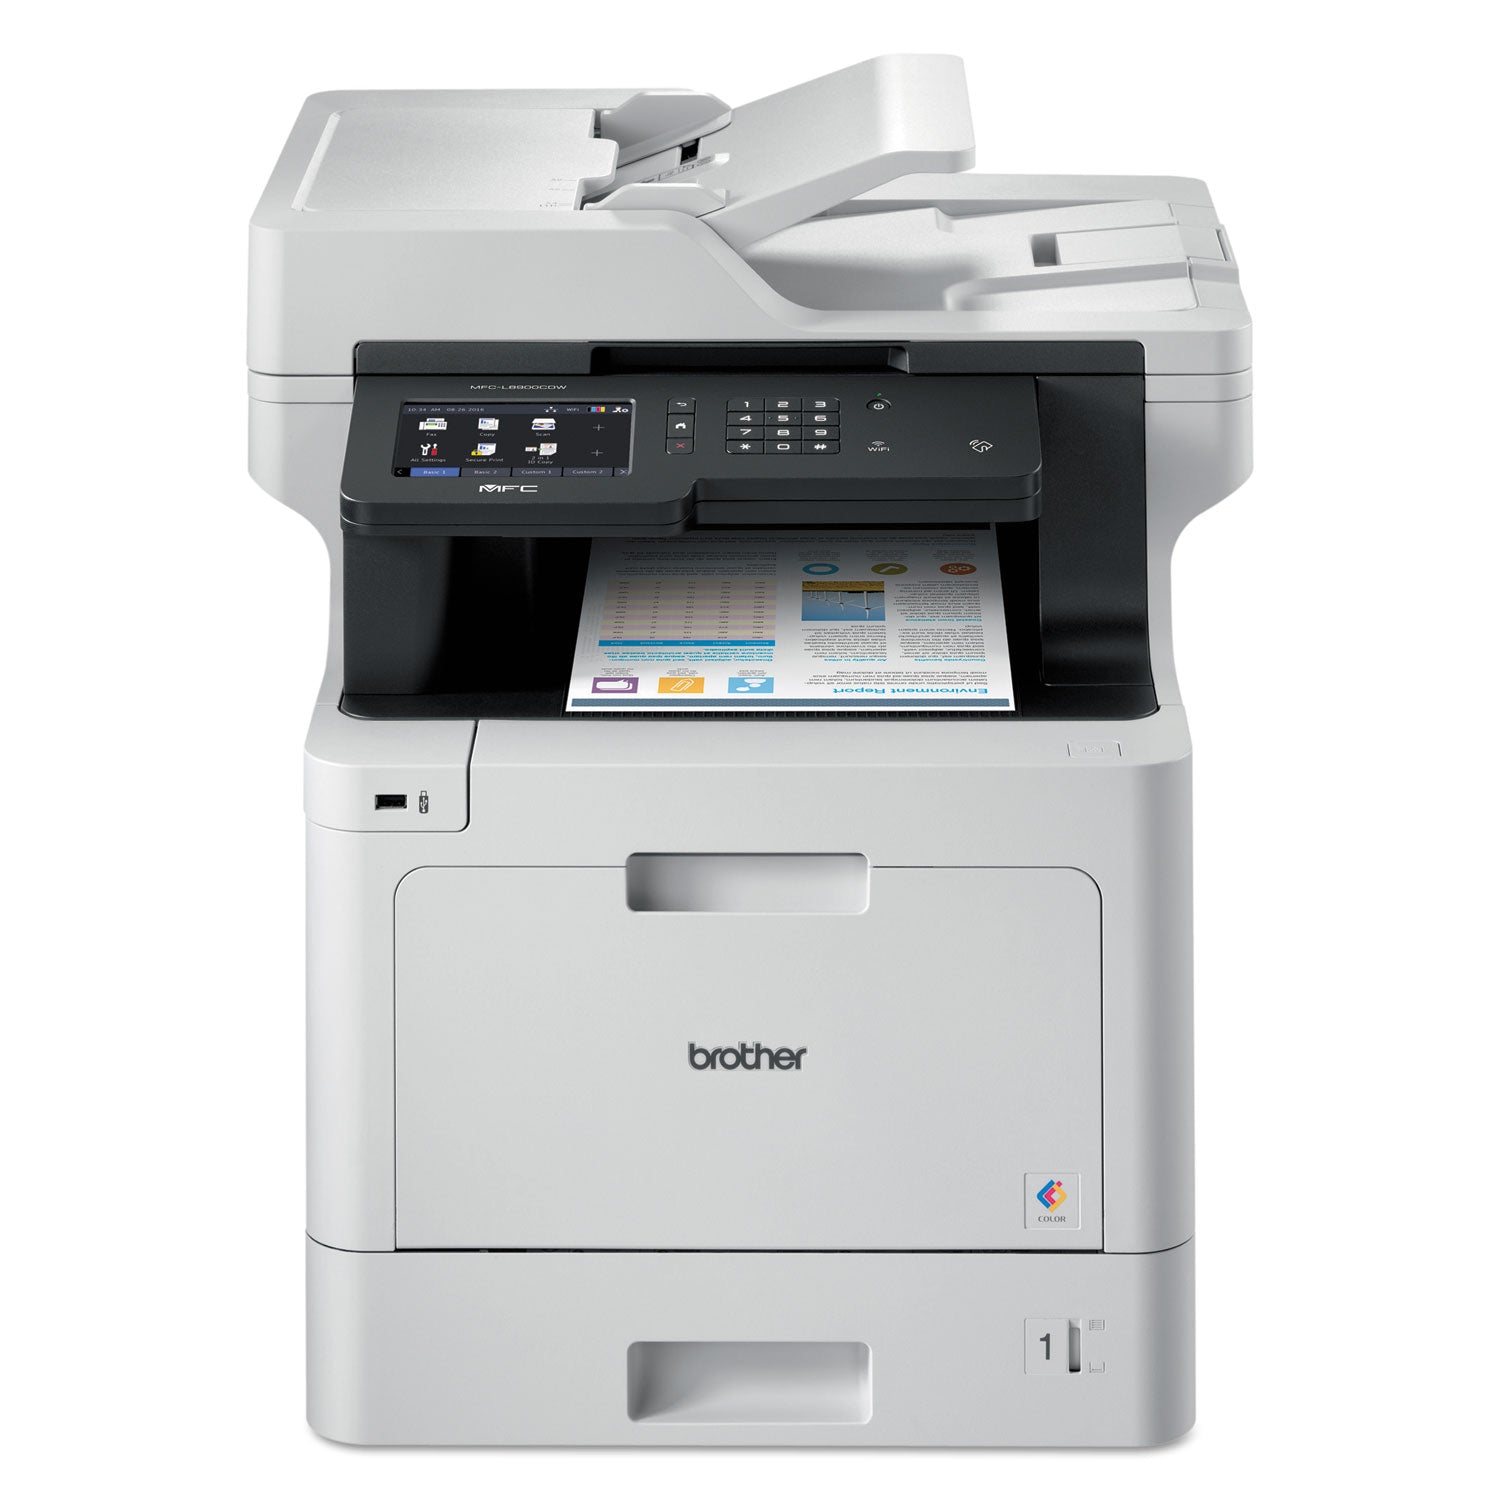 mfcl8900cdw-business-color-laser-all-in-one-printer-with-duplex-print-scan-copy-and-wireless-networking_brtmfcl8900cdw - 1